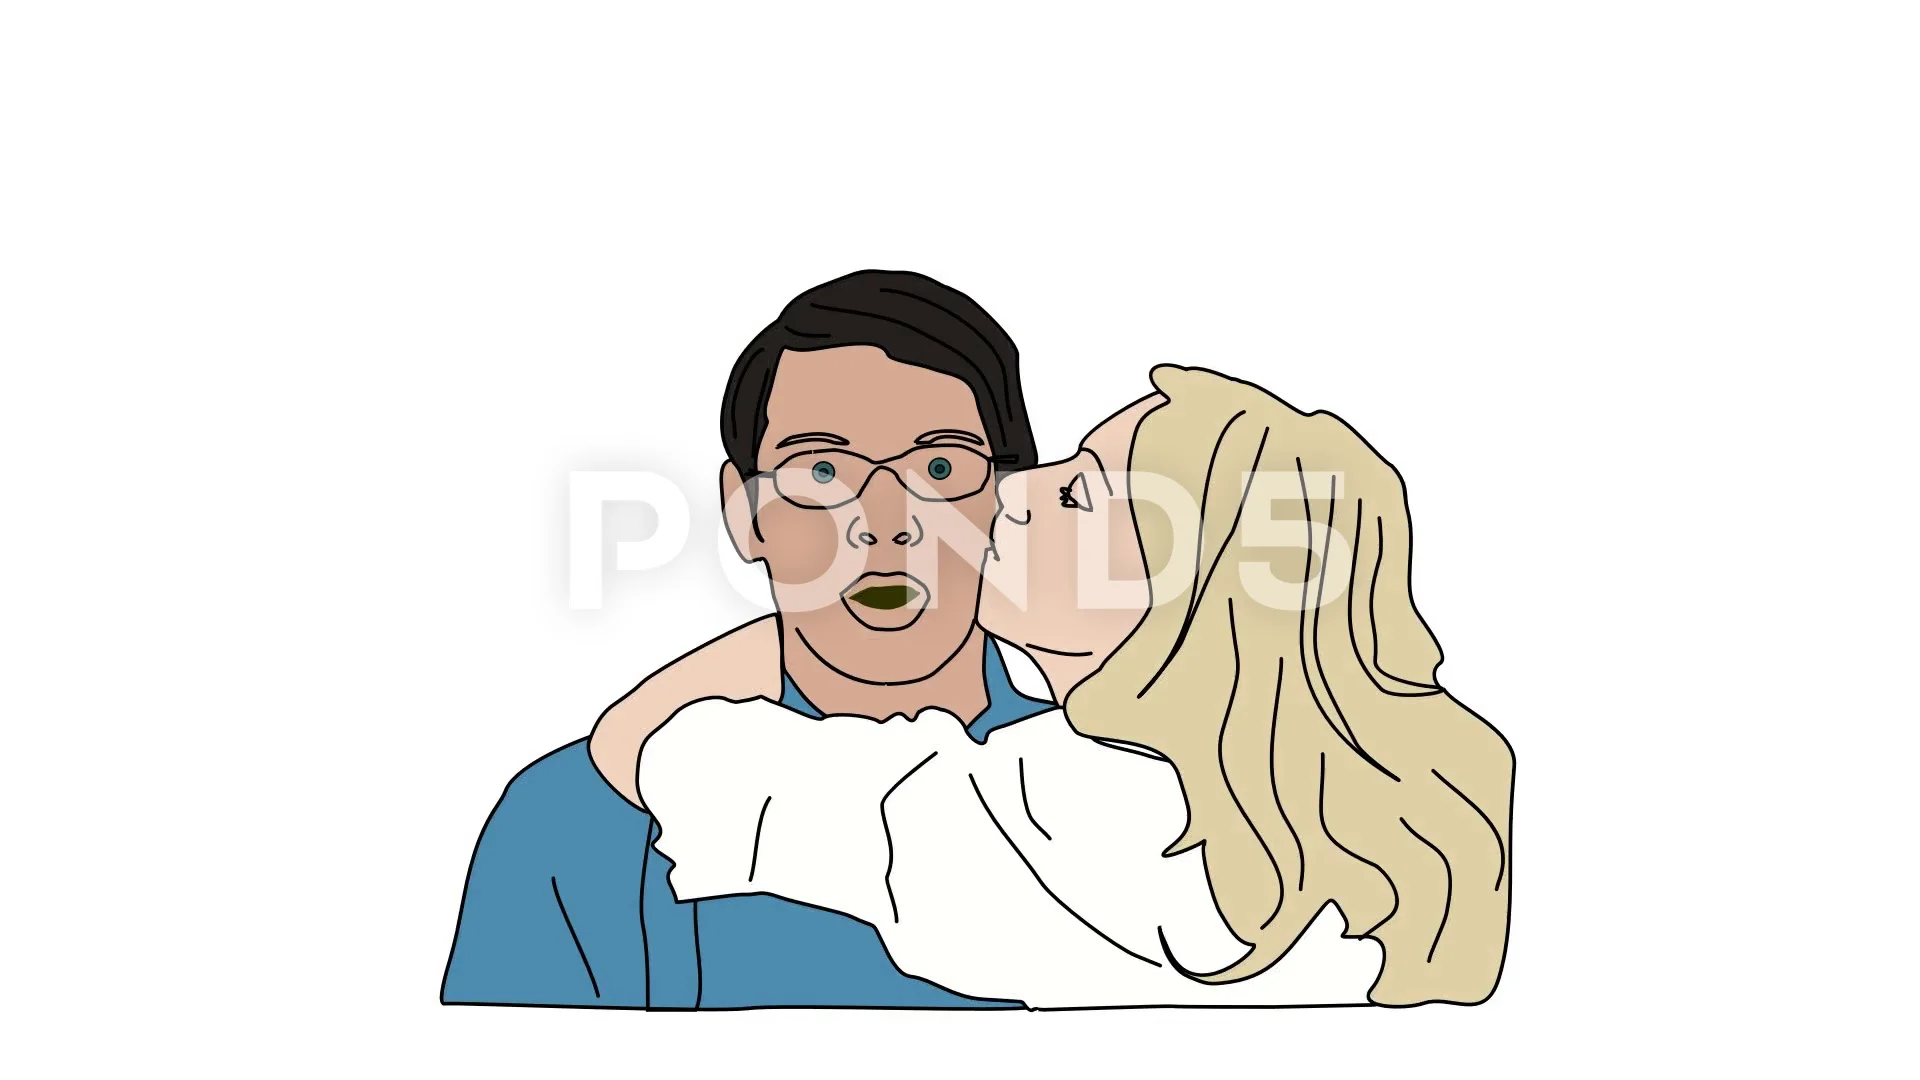 Free: Clip Art - School Boy And Girl Drawing - nohat.cc